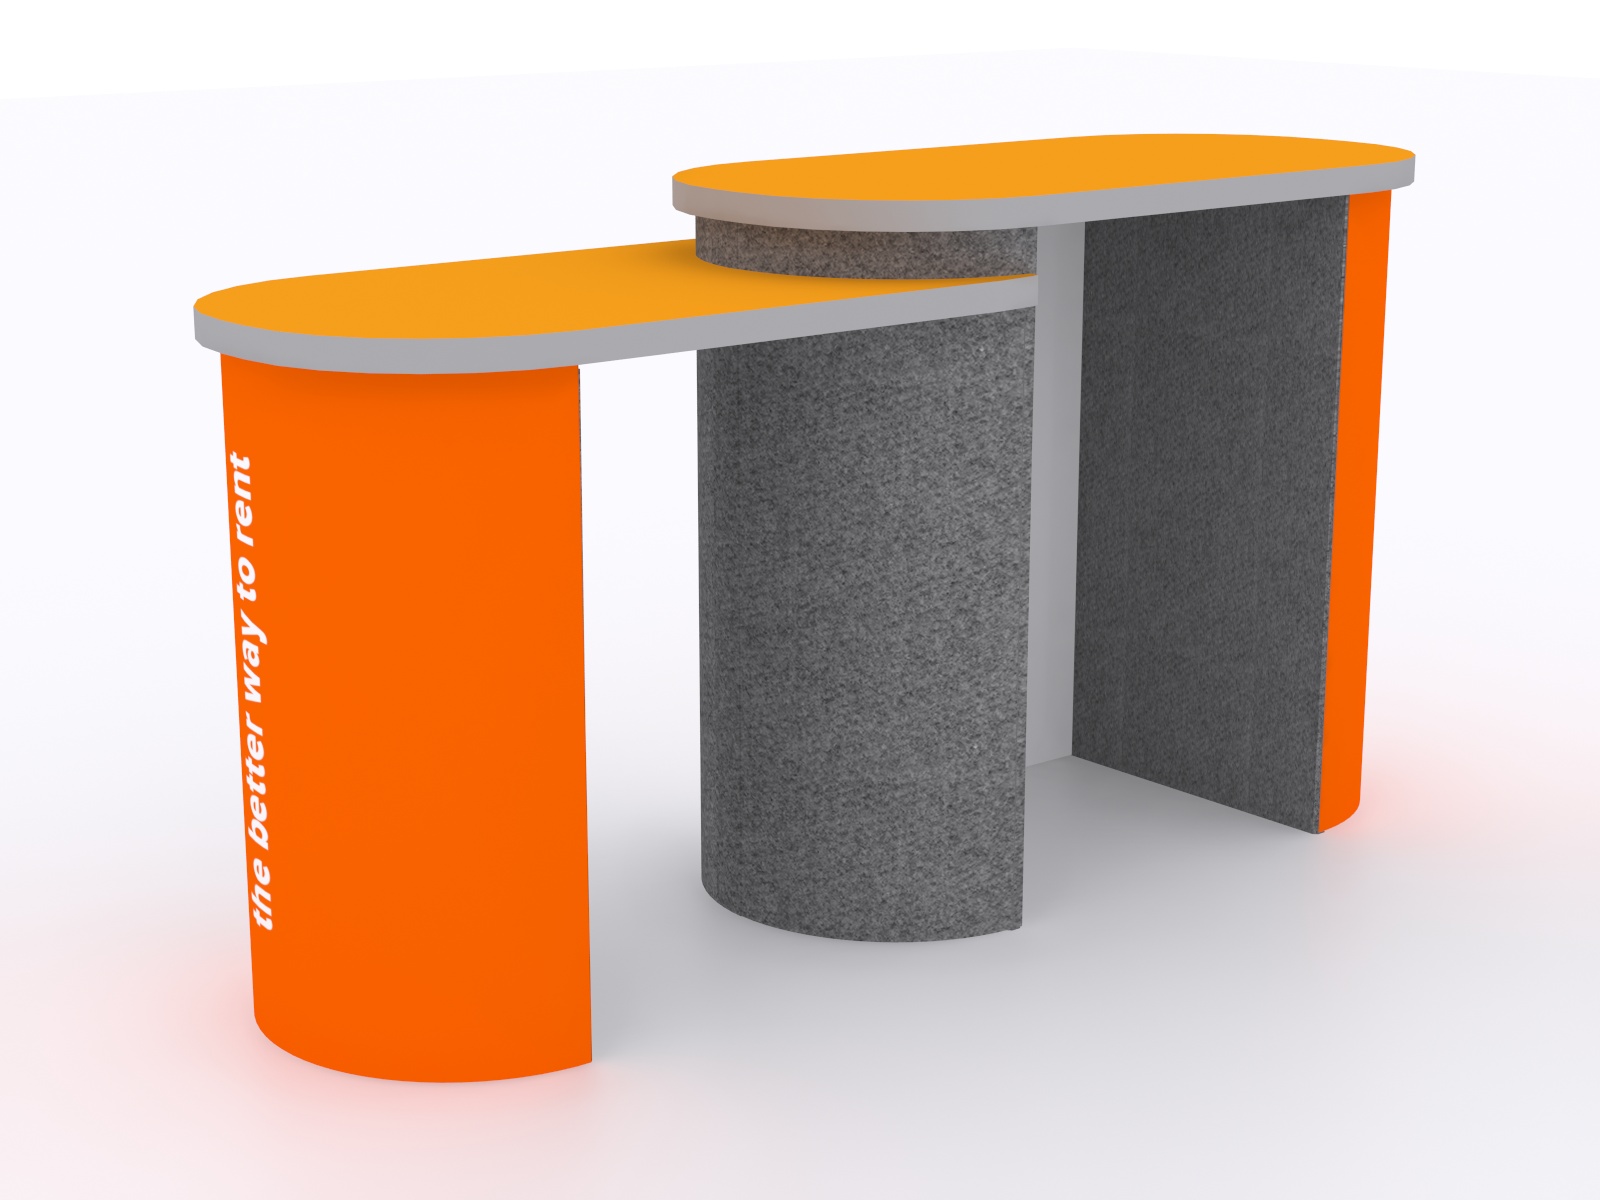 DI-672 Trade Show Pedestal -- Folding Fabric Panels -- Large Graphics (velcro-attached)